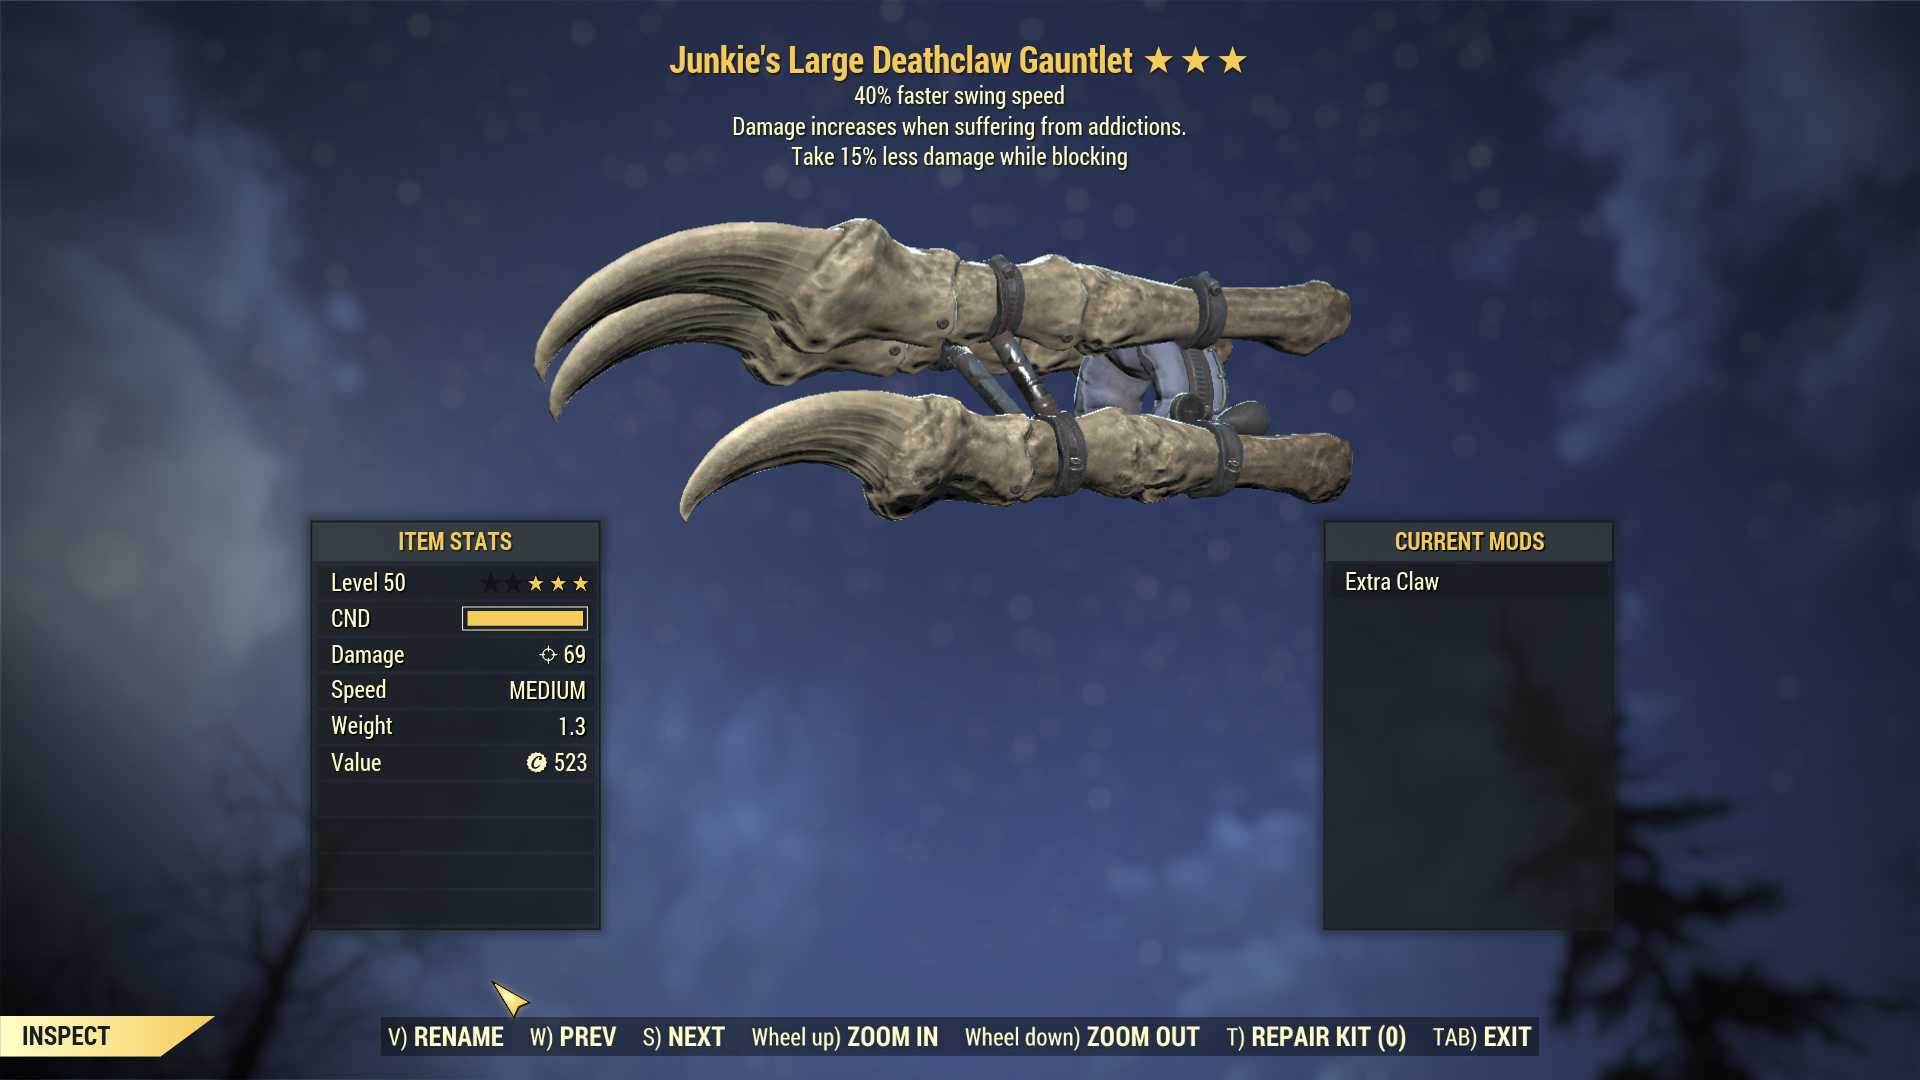 Junkie's Deathclaw Gauntlet (40% Faster Swing Speed, Take 15% less damage WB)